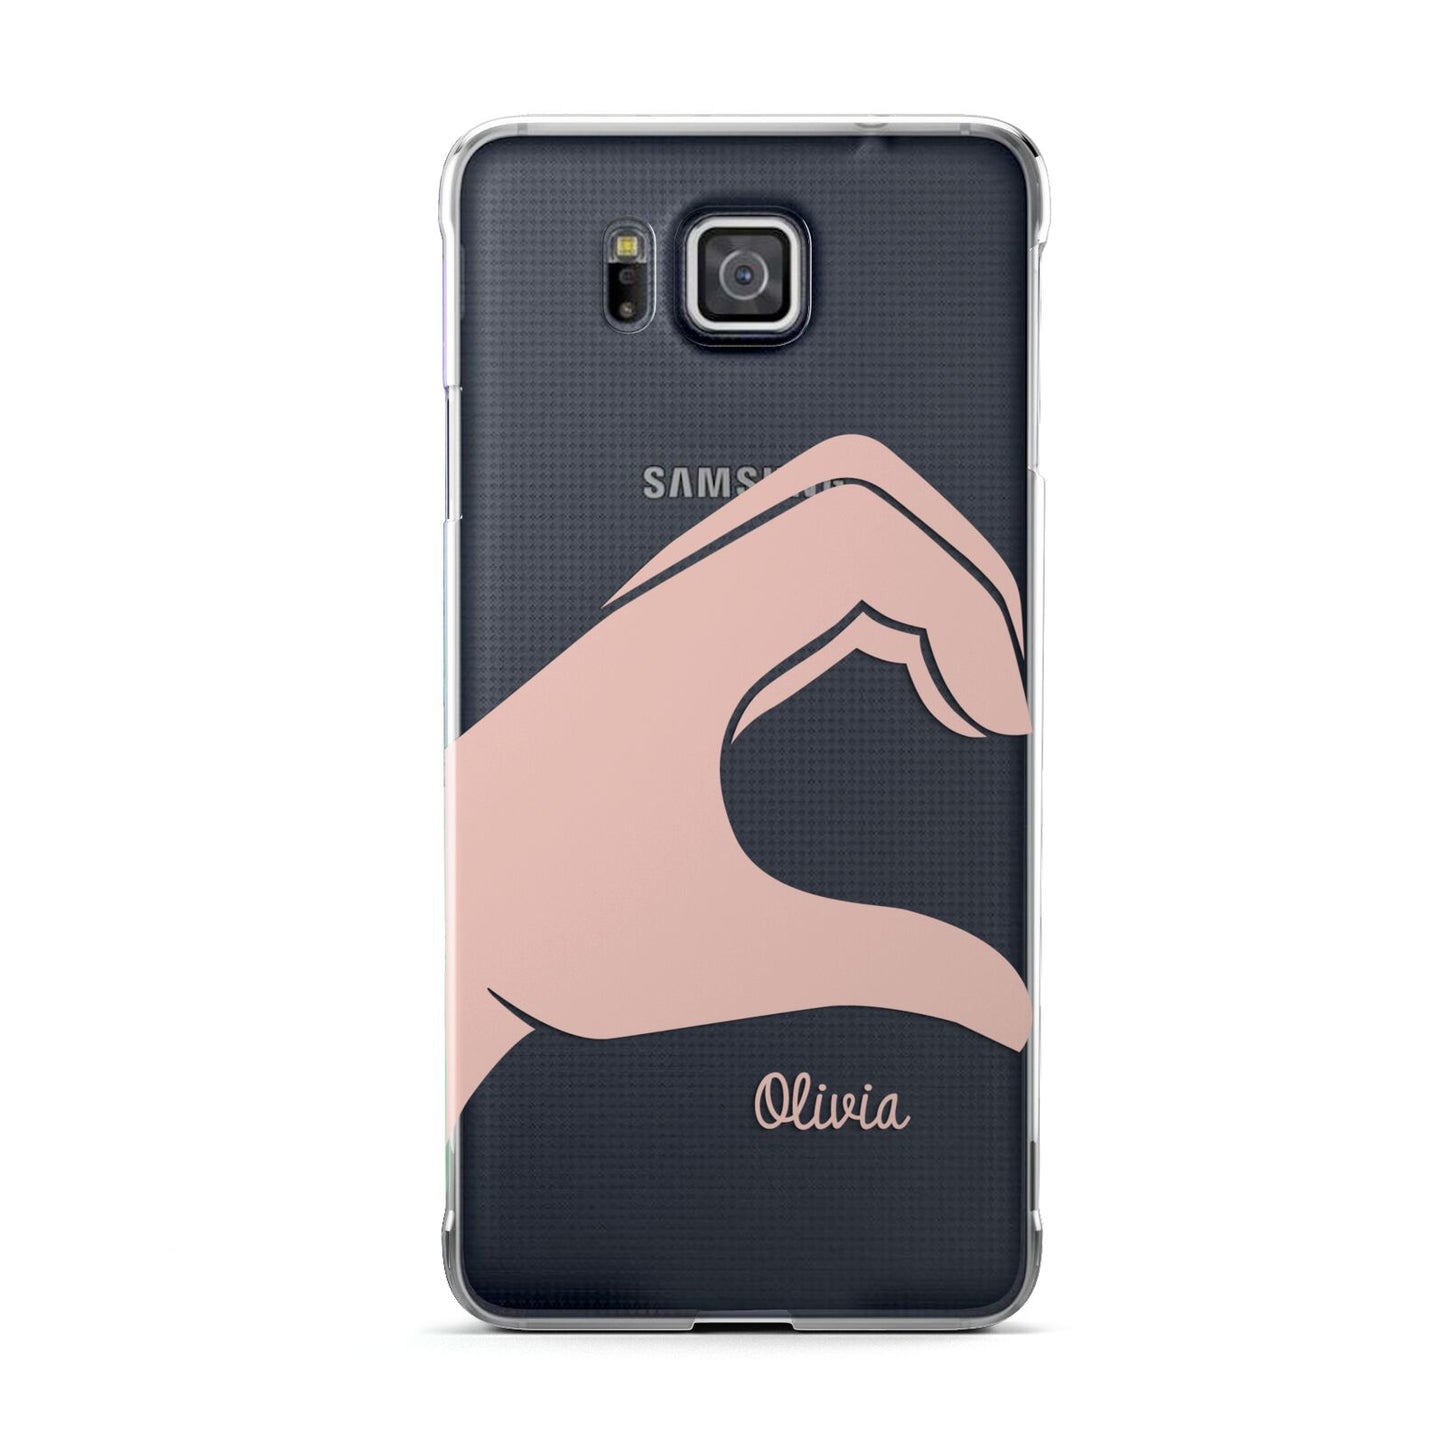 Left Hand in Half Heart with Name Samsung Galaxy Alpha Case